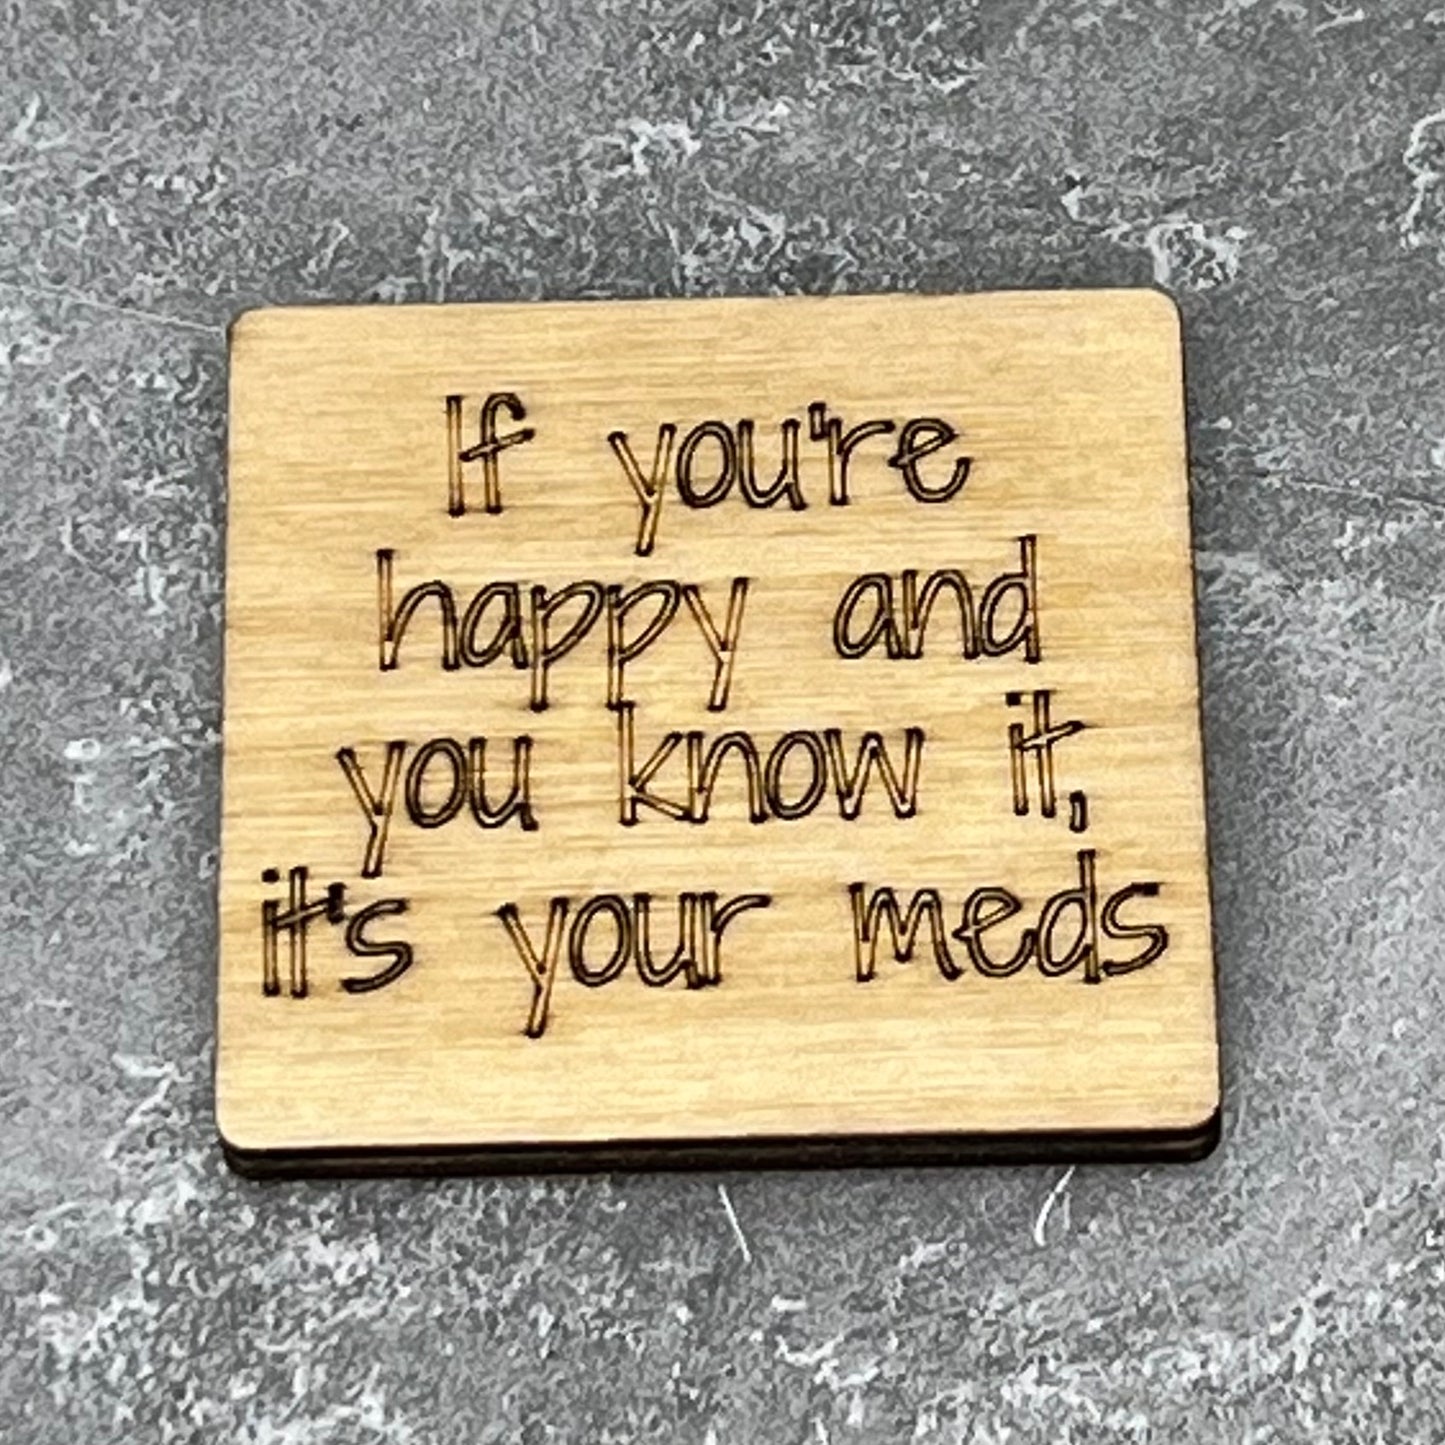 Fridge Magnet: If You're Happy and You Know It, It's Your Meds